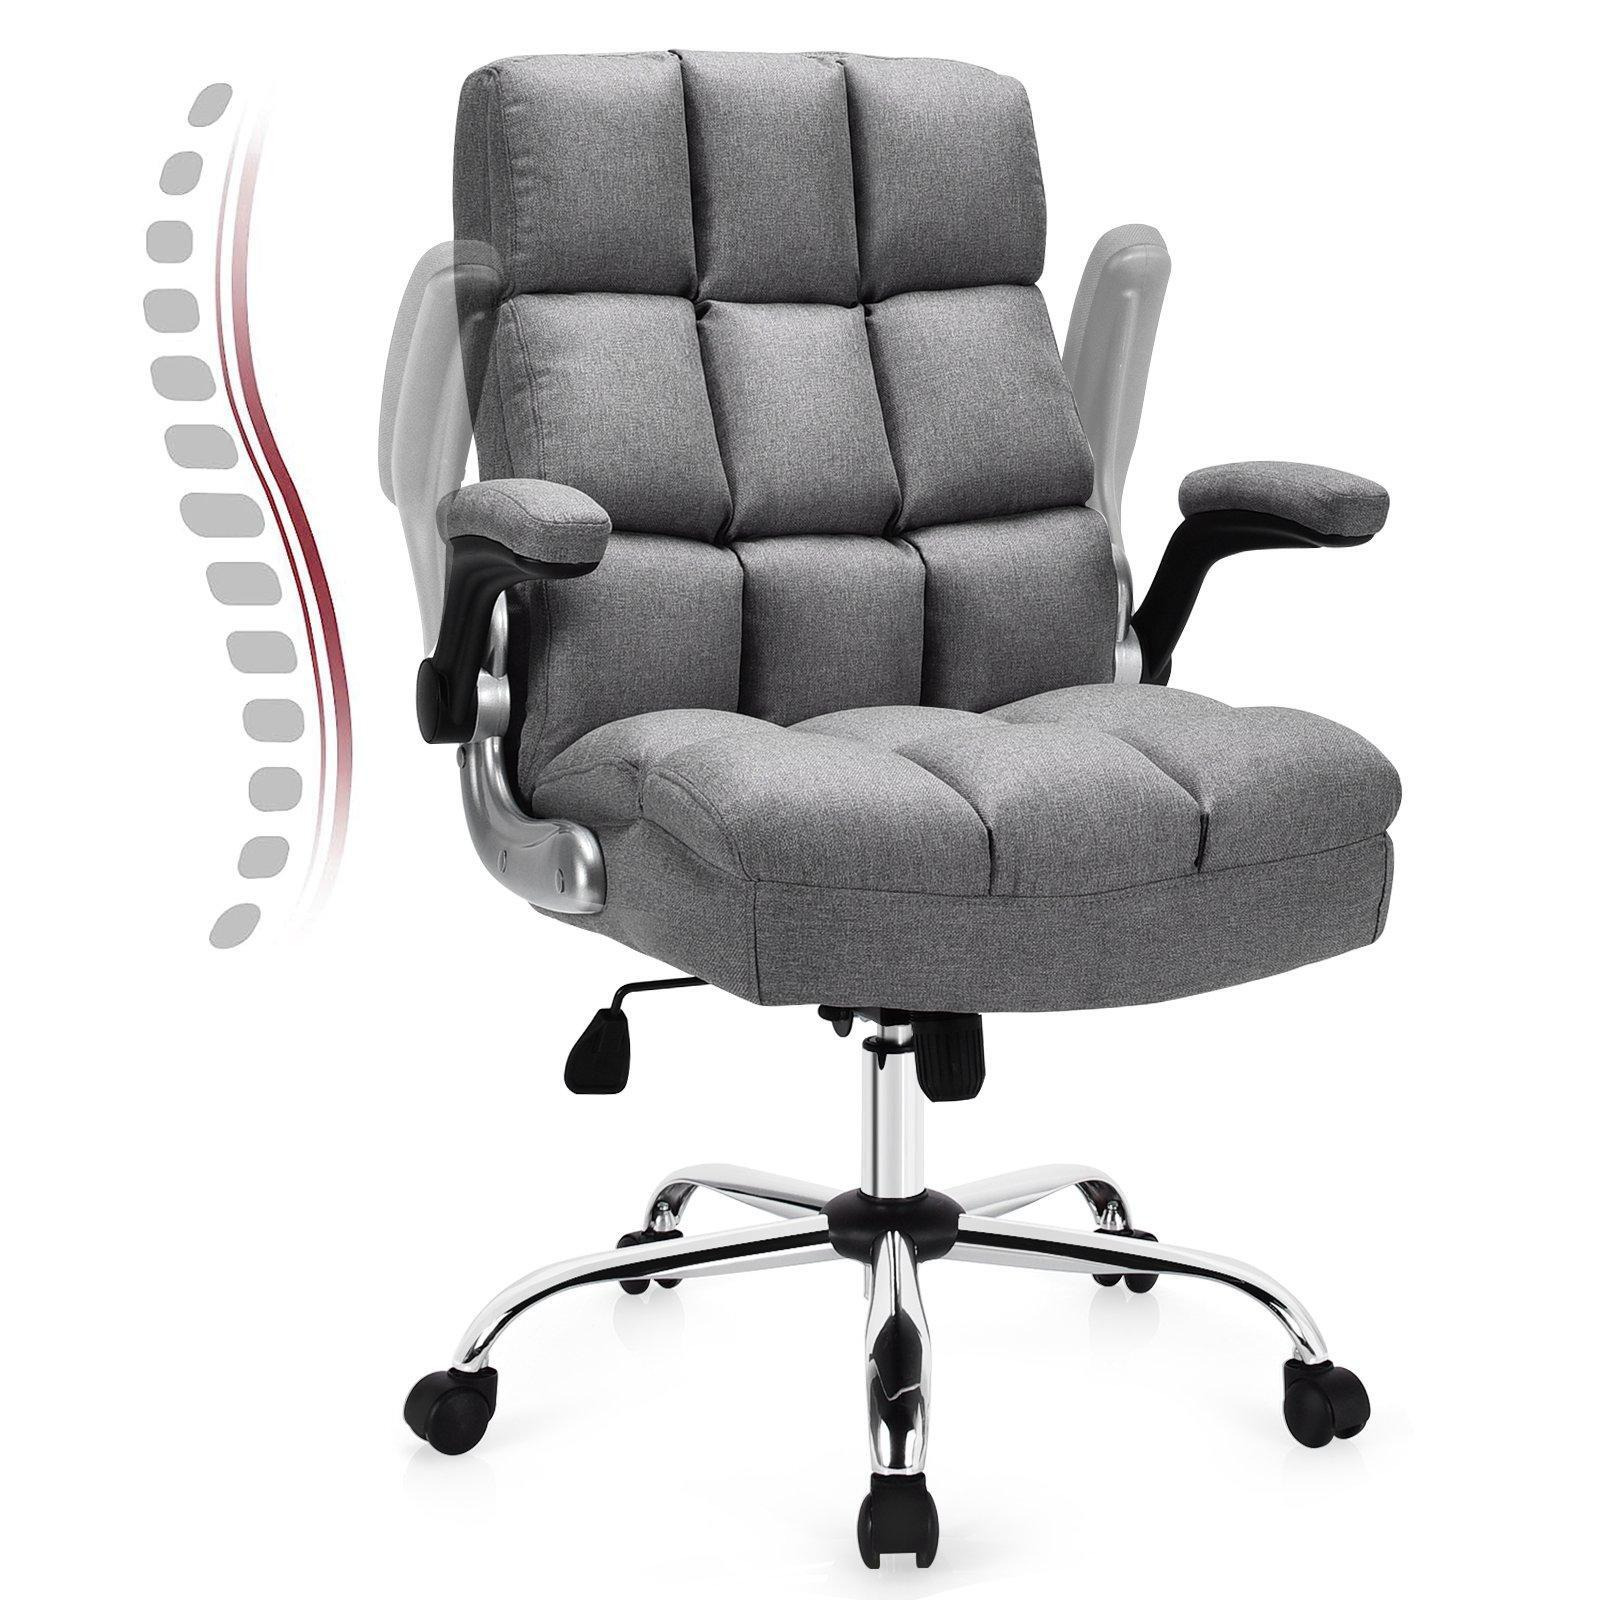 Executive Office Chair Ergonomic Padded High Back Swivel Computer Desk Chairs - image 1